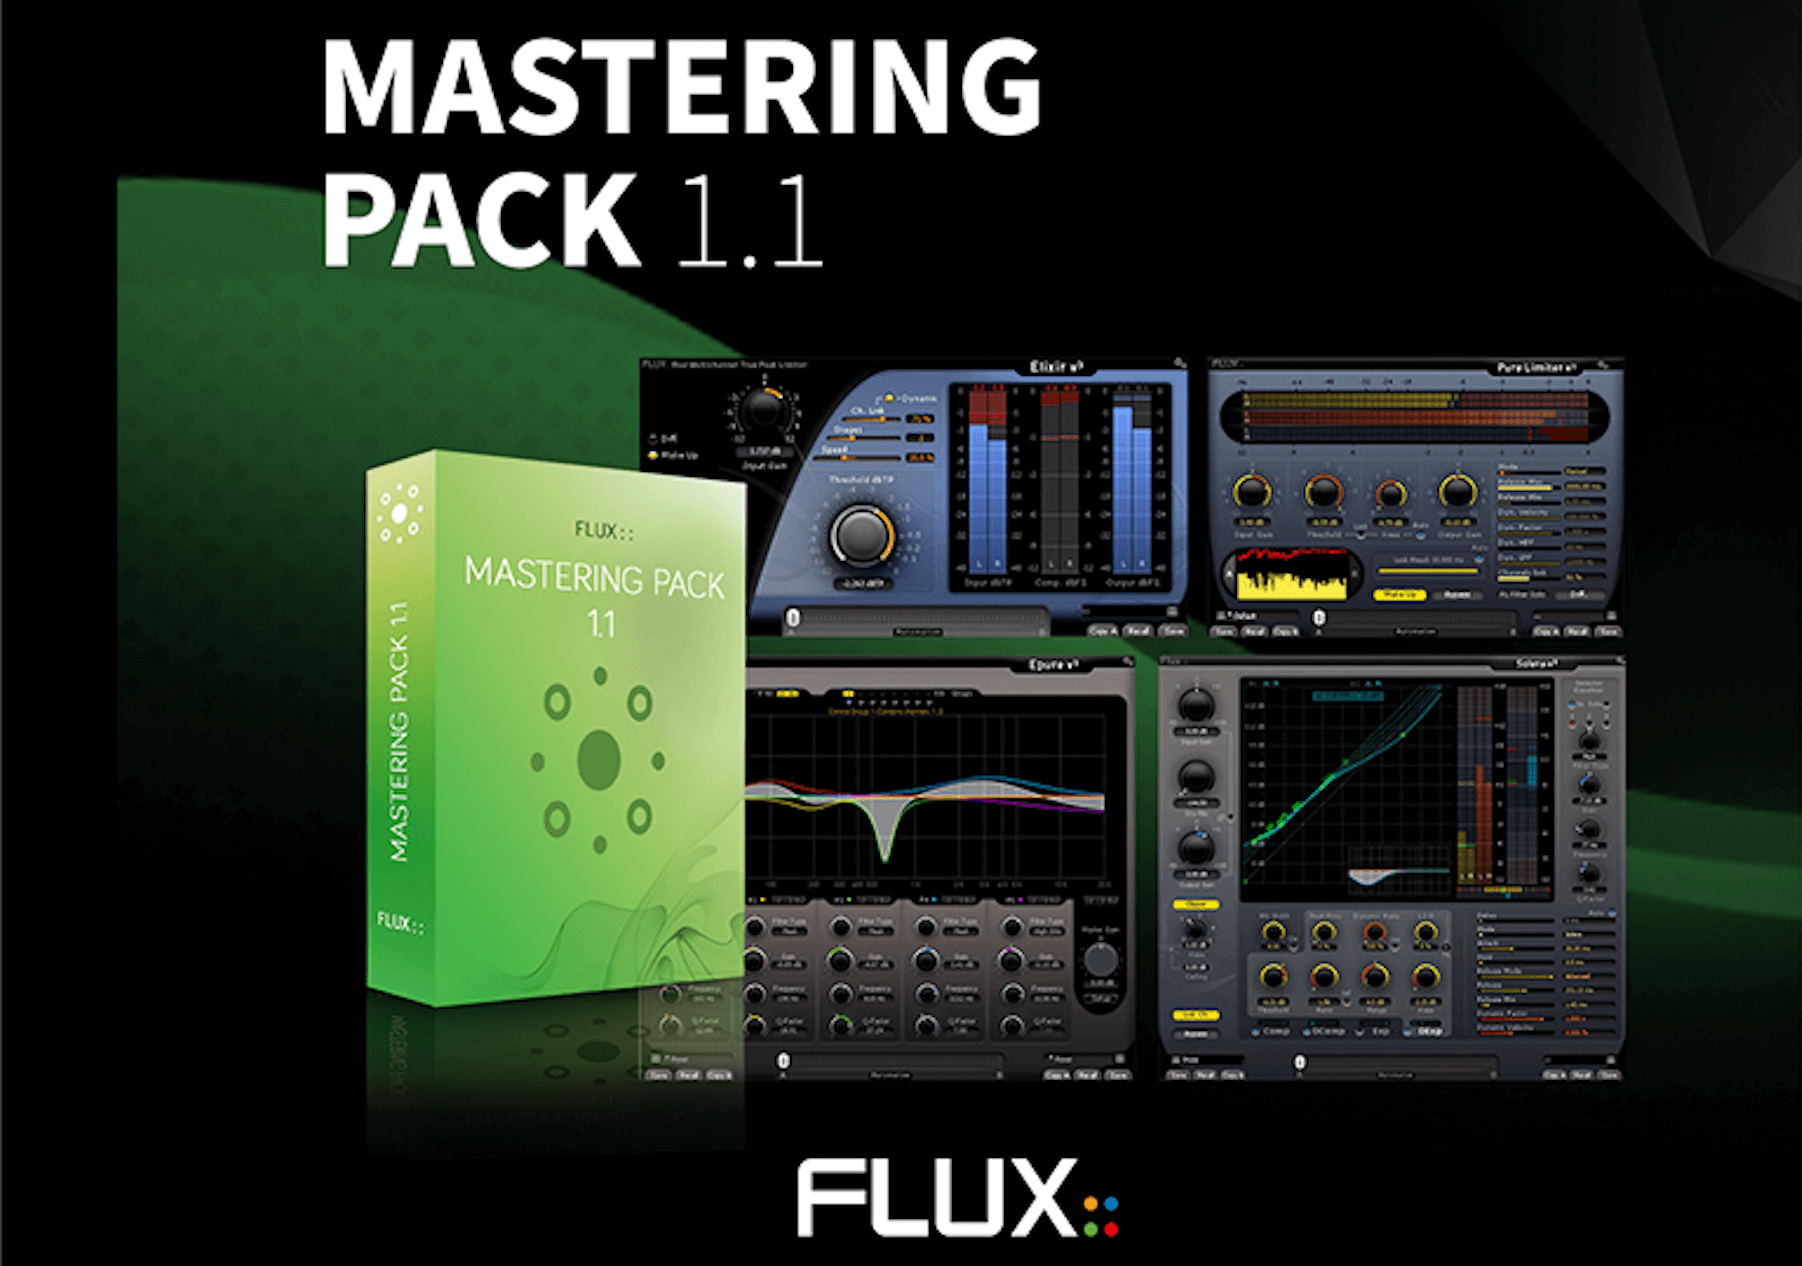 Mastering Pack 1.1